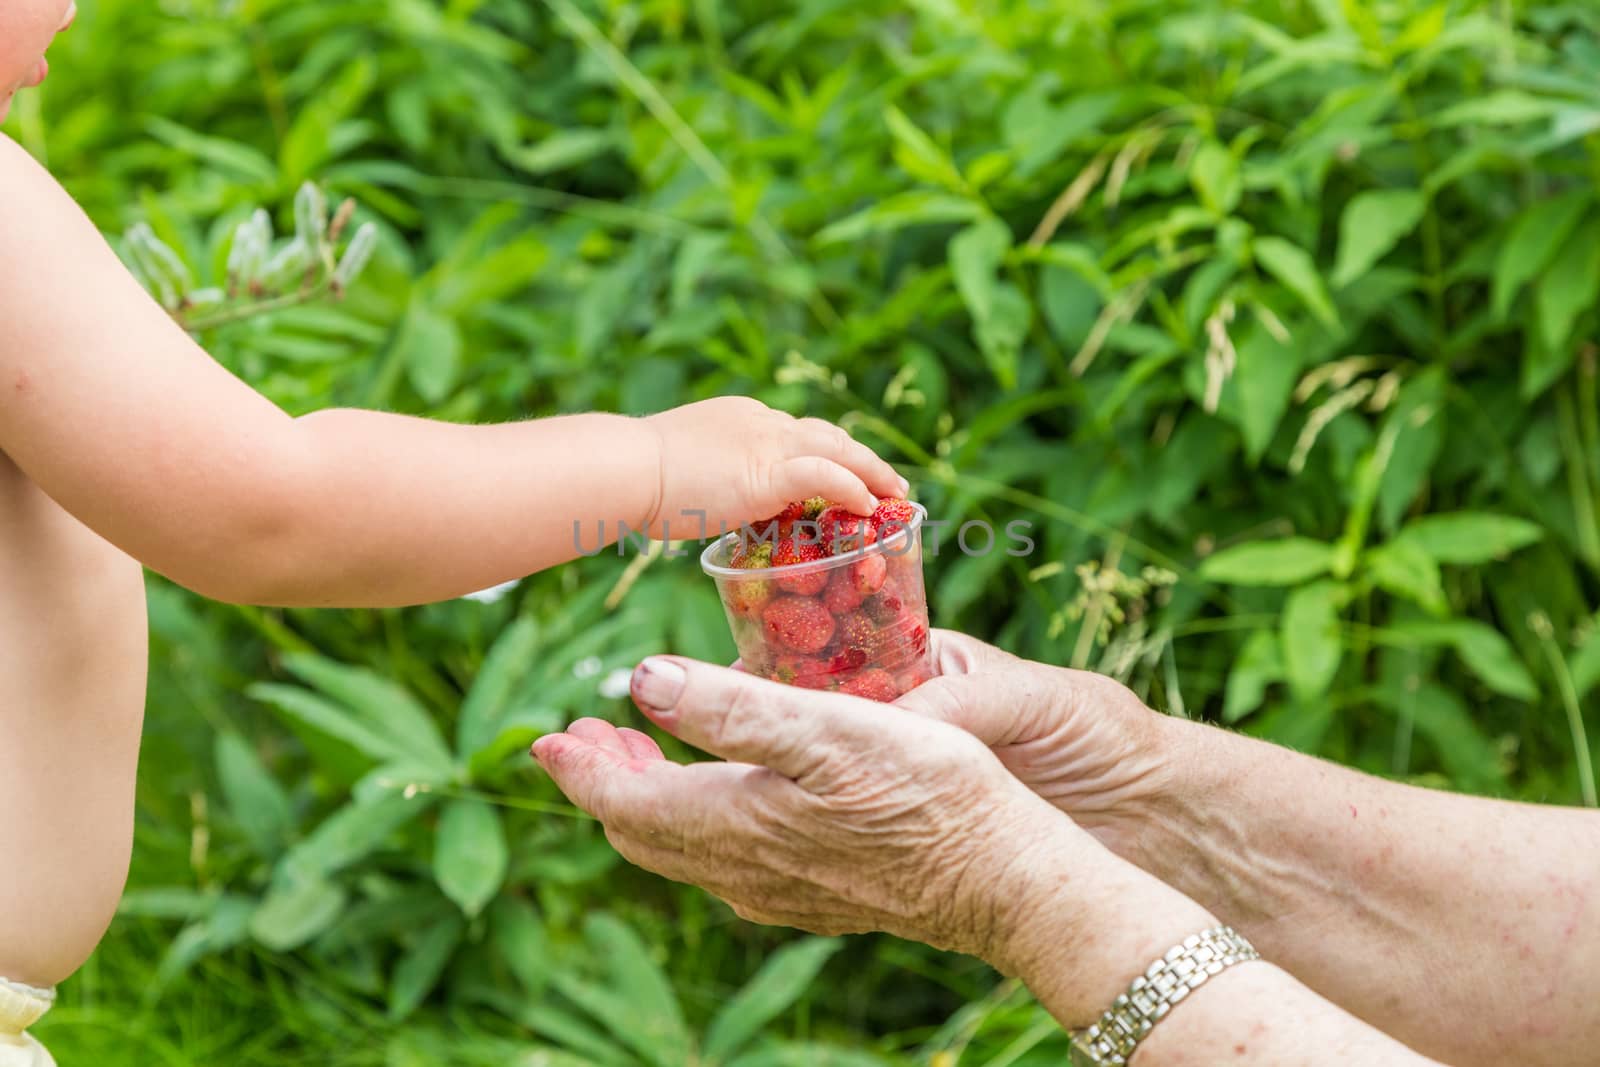 Grandmother gives her grandson some strawberries in her country house garden by galinasharapova